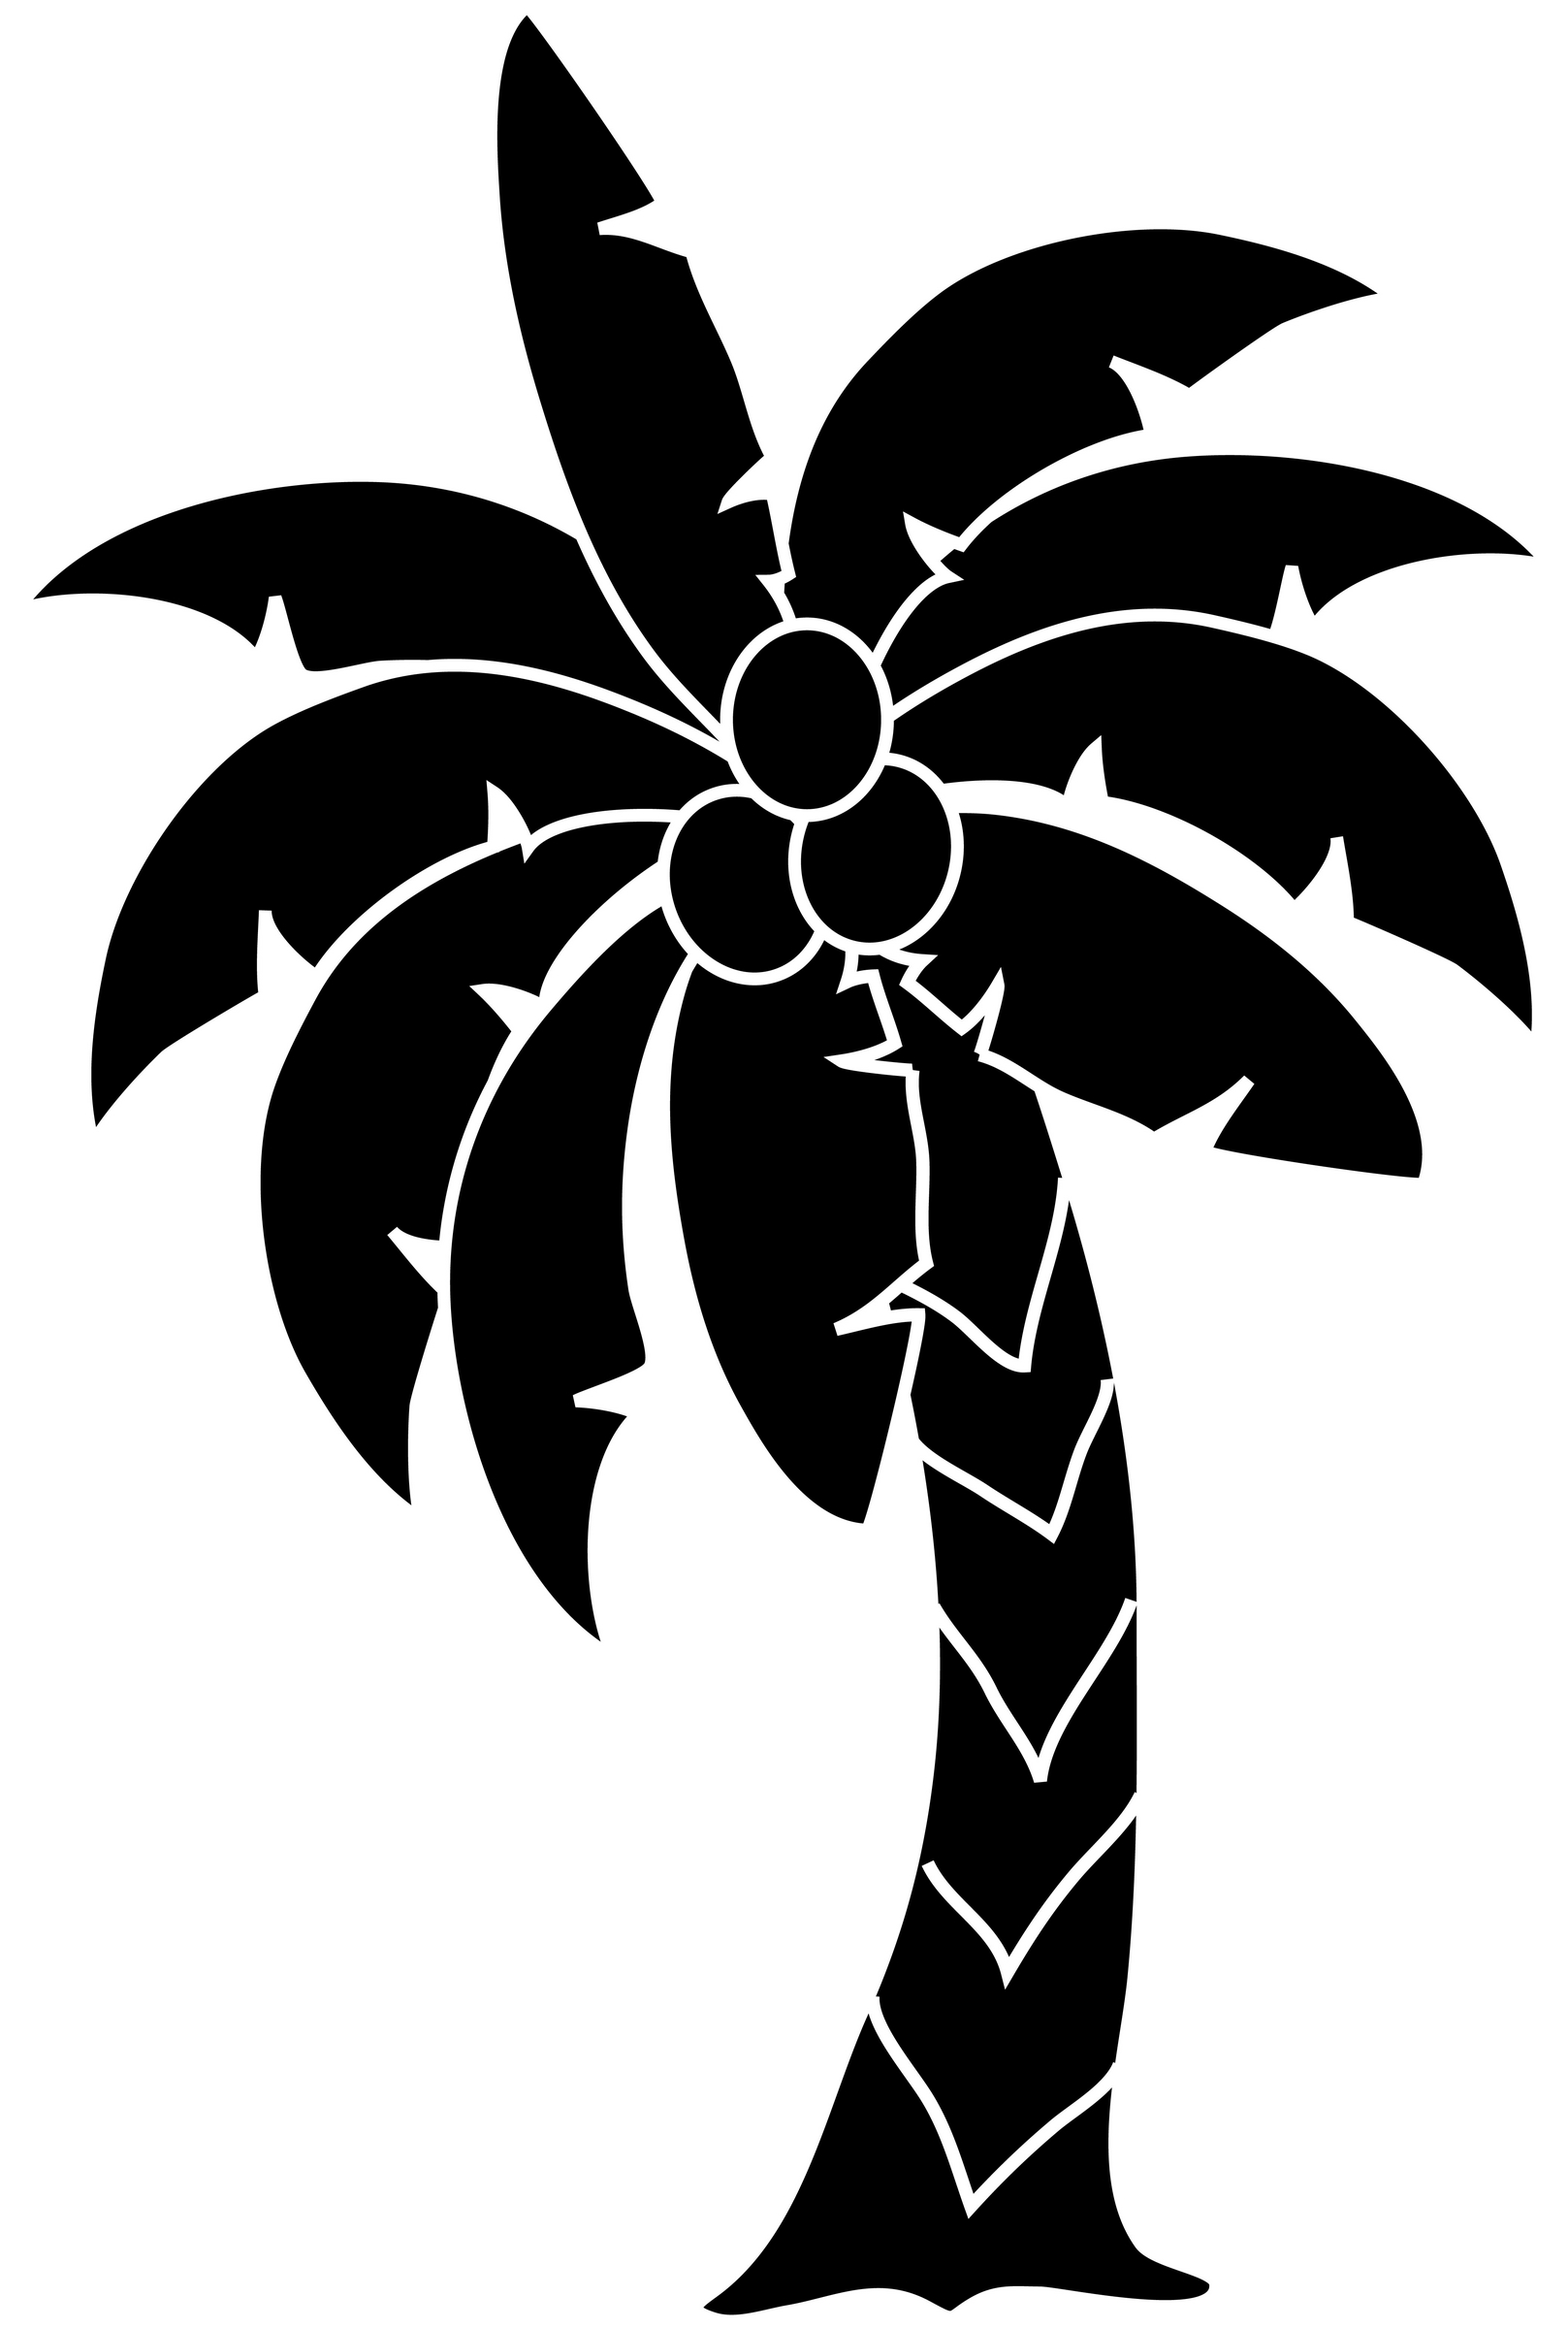 Palm tree clipart tropical black and white